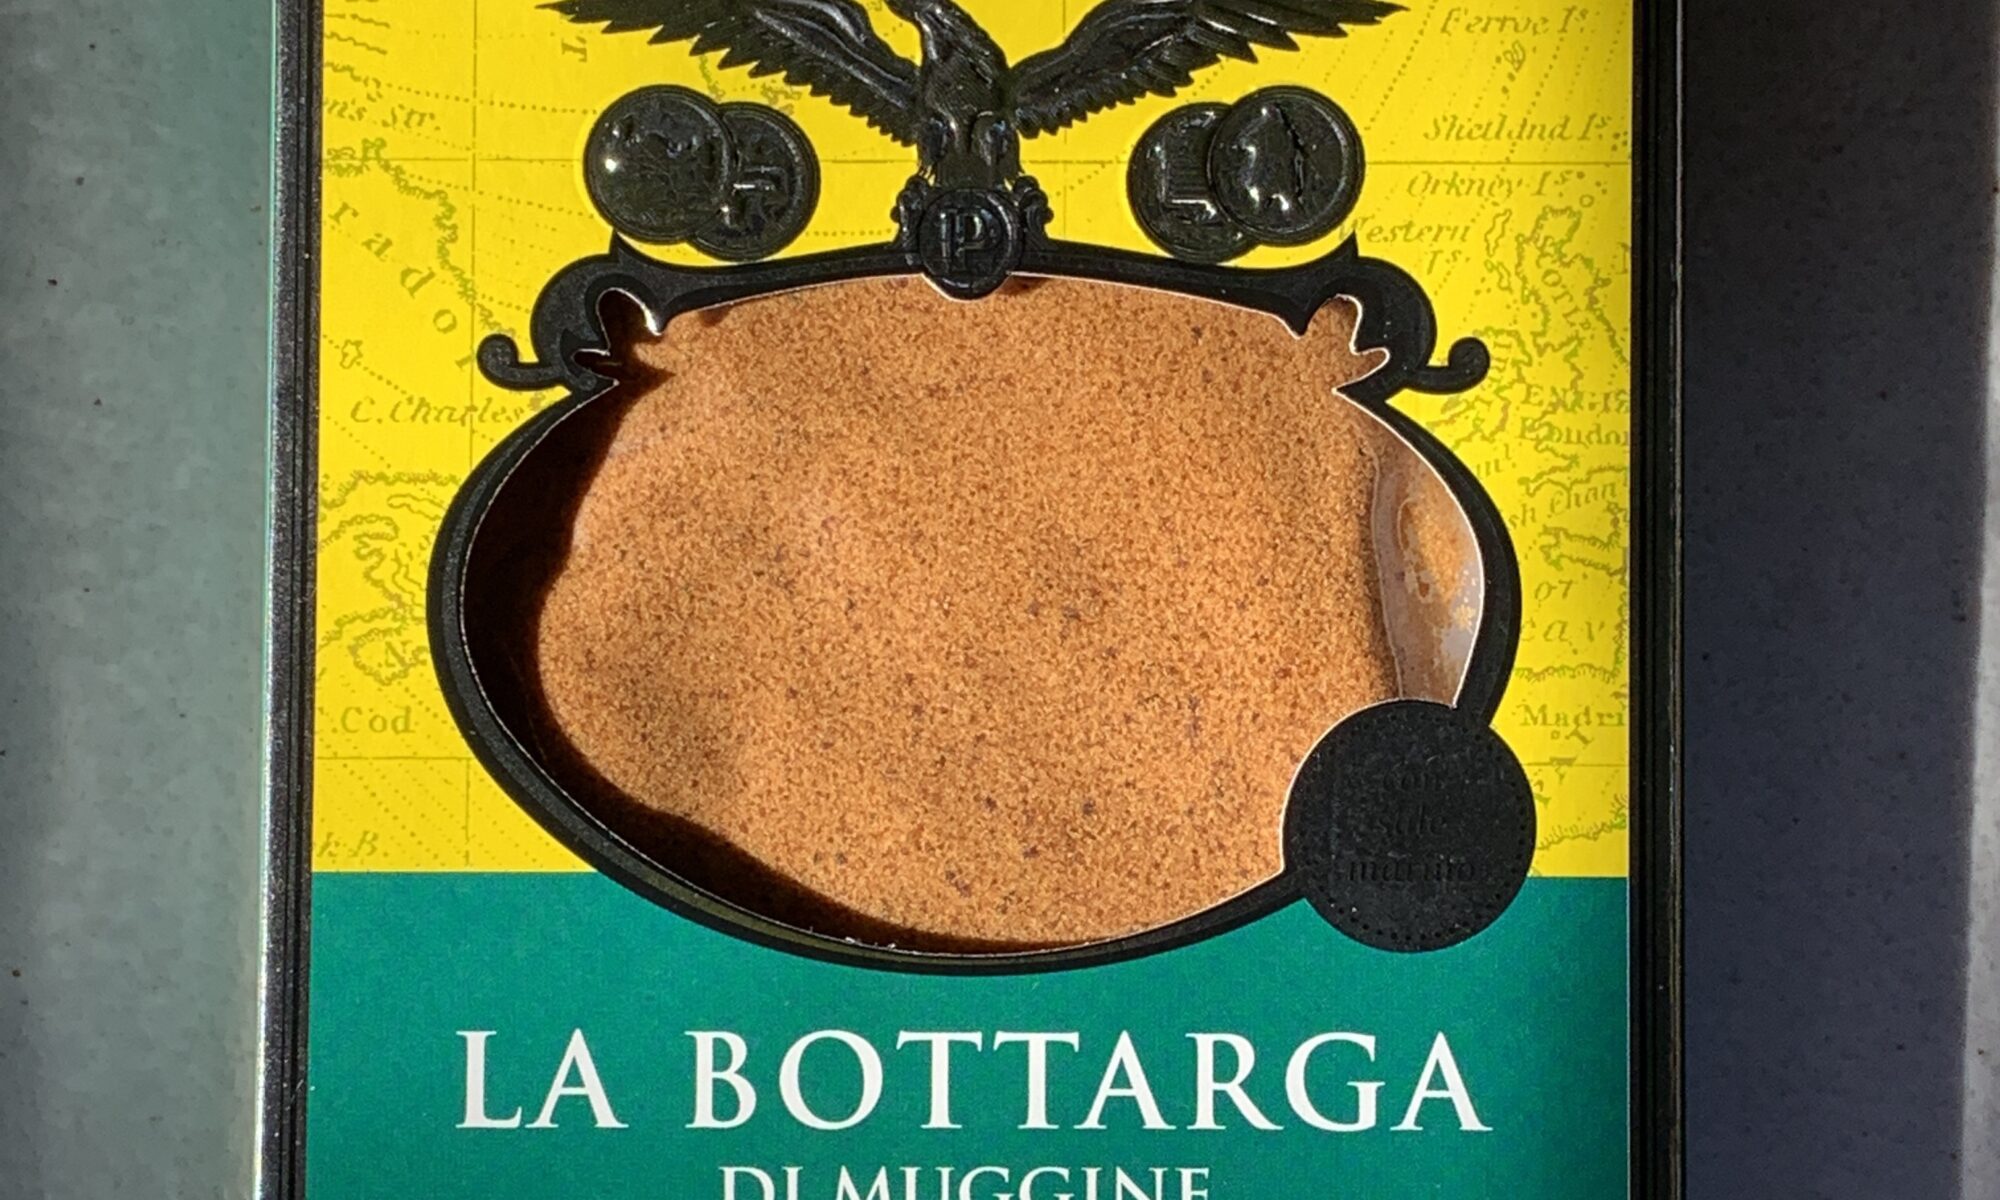 Image of the front of a package of Angelo Parodi Grated Mullet Bottarga (Salted, Dried Roe)